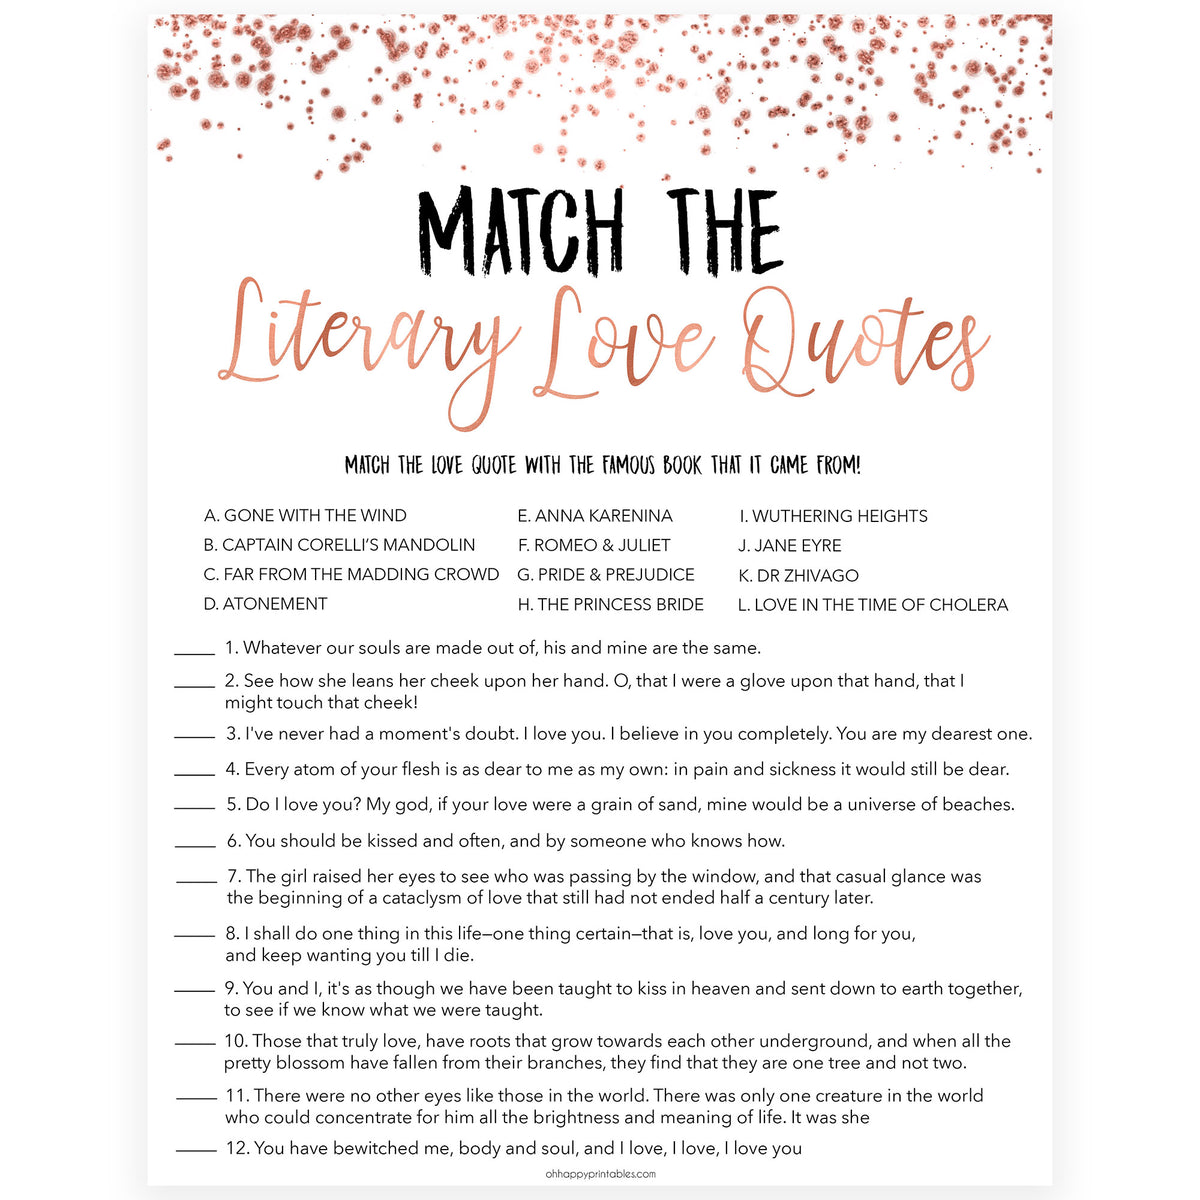 Match the Literary Love Quotes - Rose Gold Foil